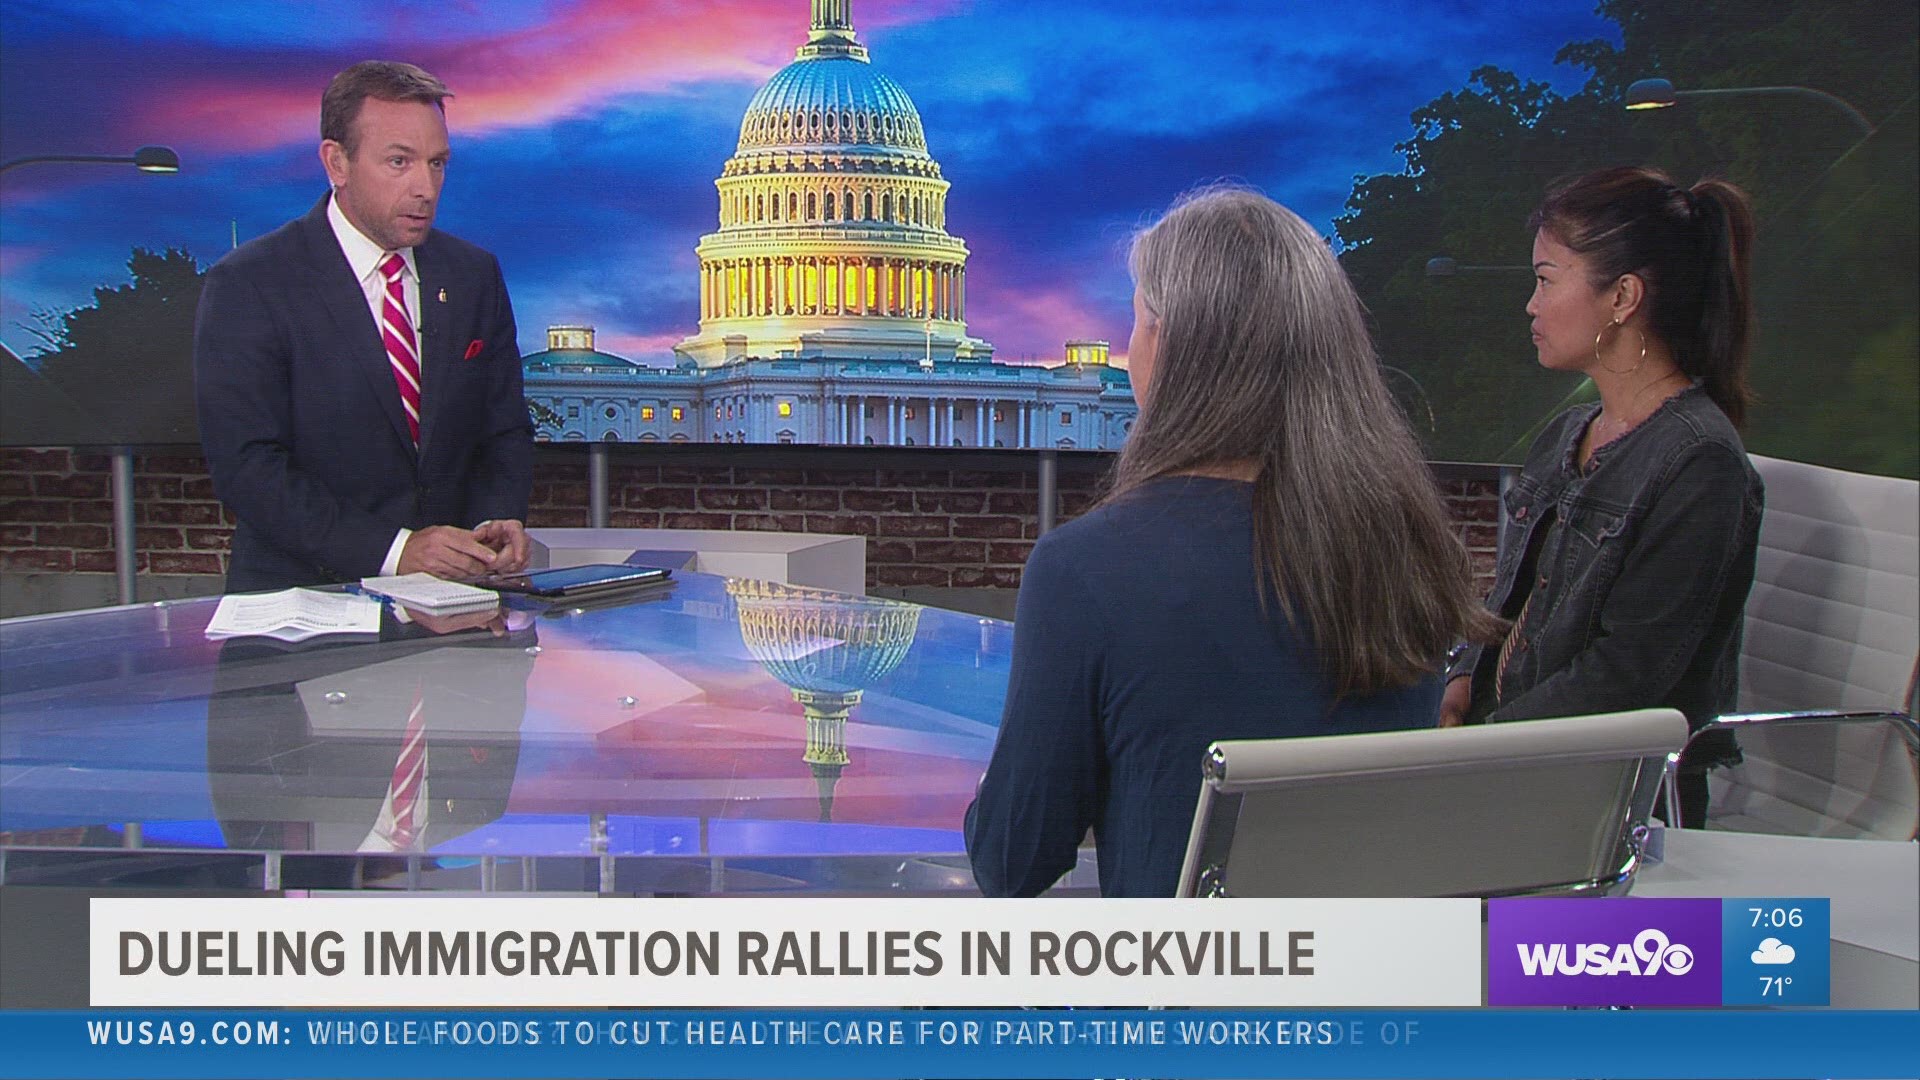 More than a thousand people took part in a dueling rally in Rockville.
At issue:  How Montgomery County works with federal ICE officials. Author and rally organizer, Michelle Malkin, and community and immigration activist Joanna Silver debate the issue on Off Script.